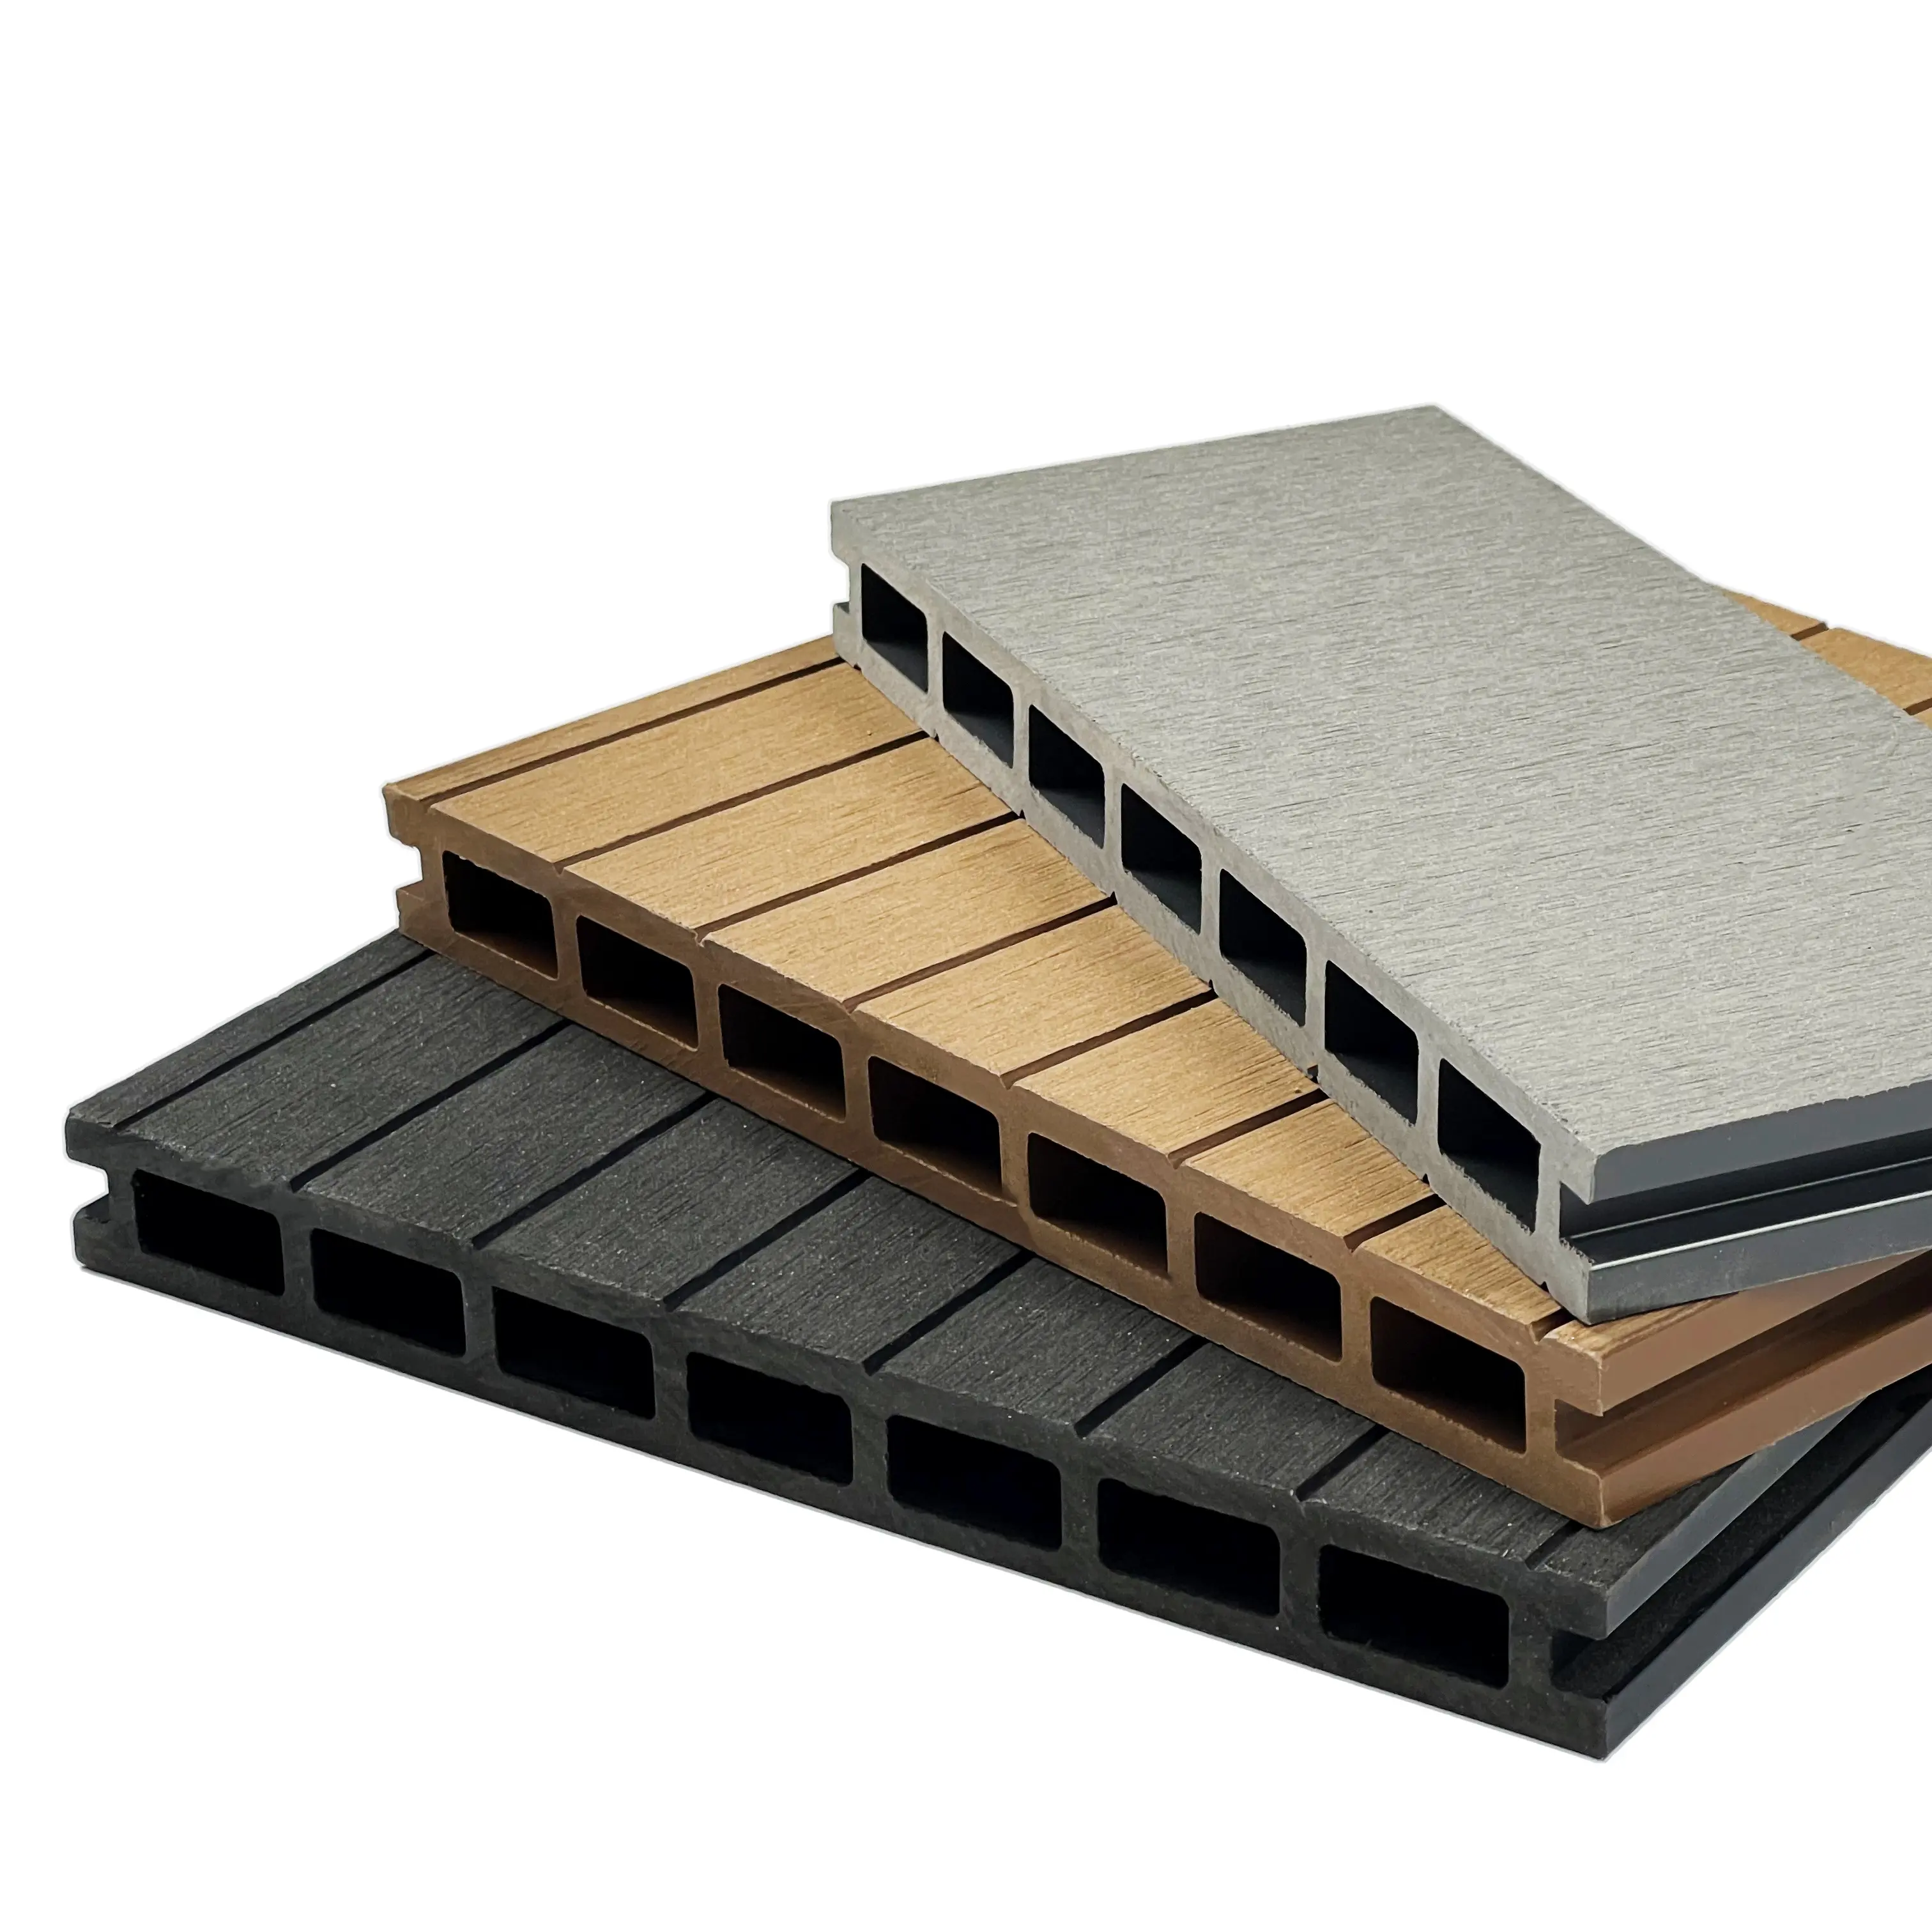 Crack-resistant factory price flooring Board for Outdoor/Pool/Garden/Balcony/terrace rookie of the year wpc decking waterproof